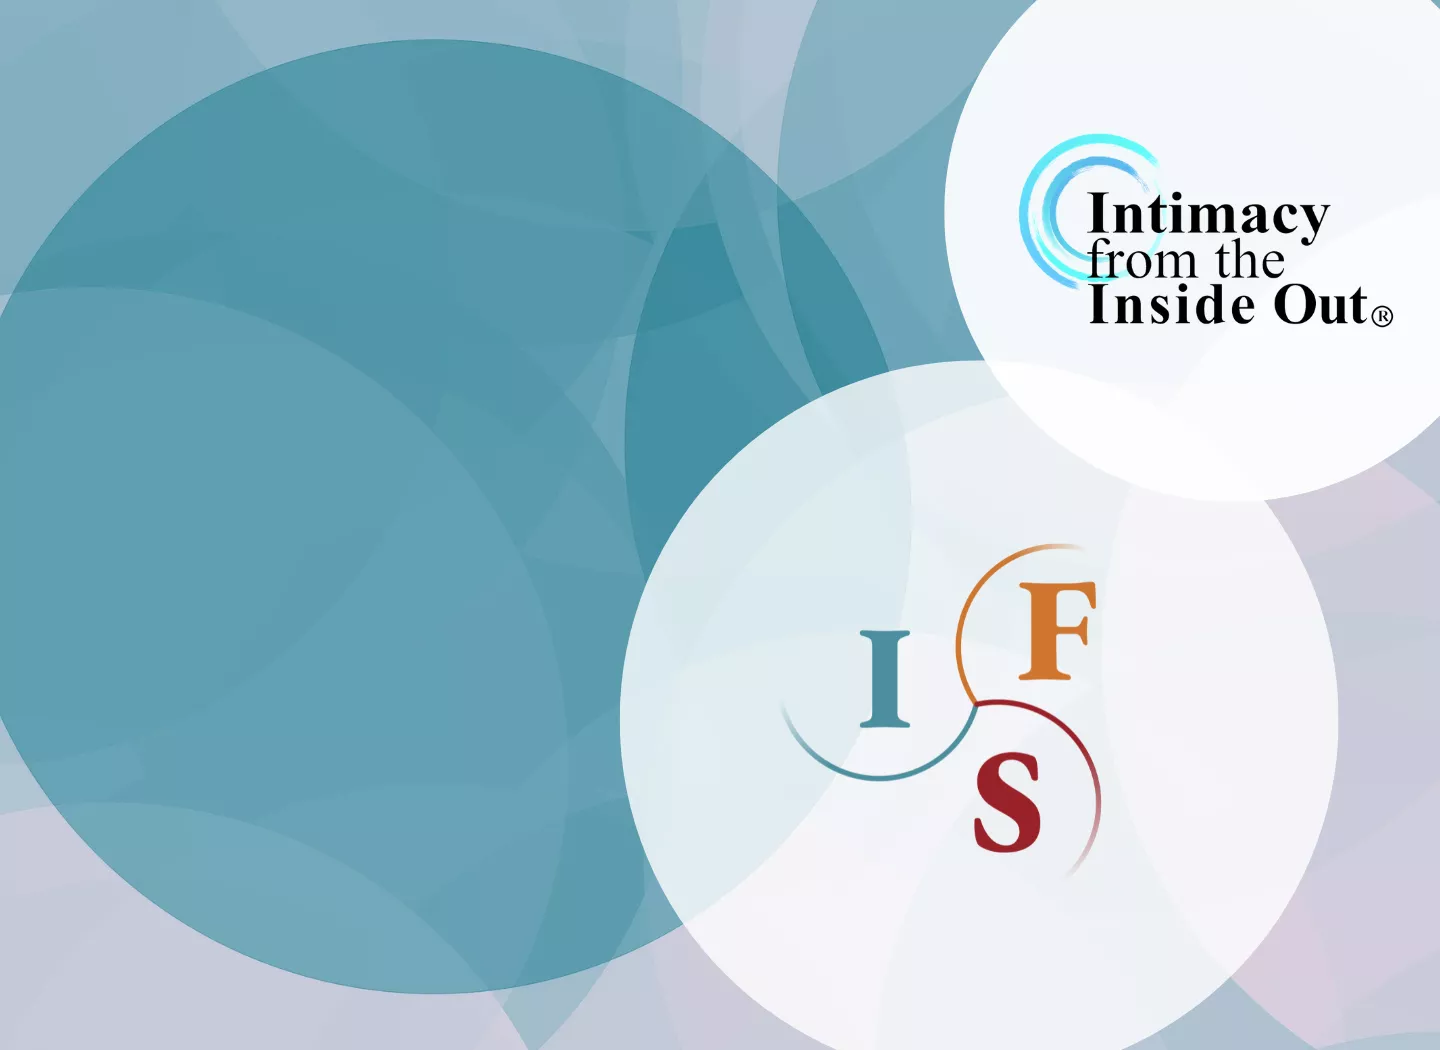 Image of blue circles surrounded by the Intimacy from the Inside out logo and the IFS logo